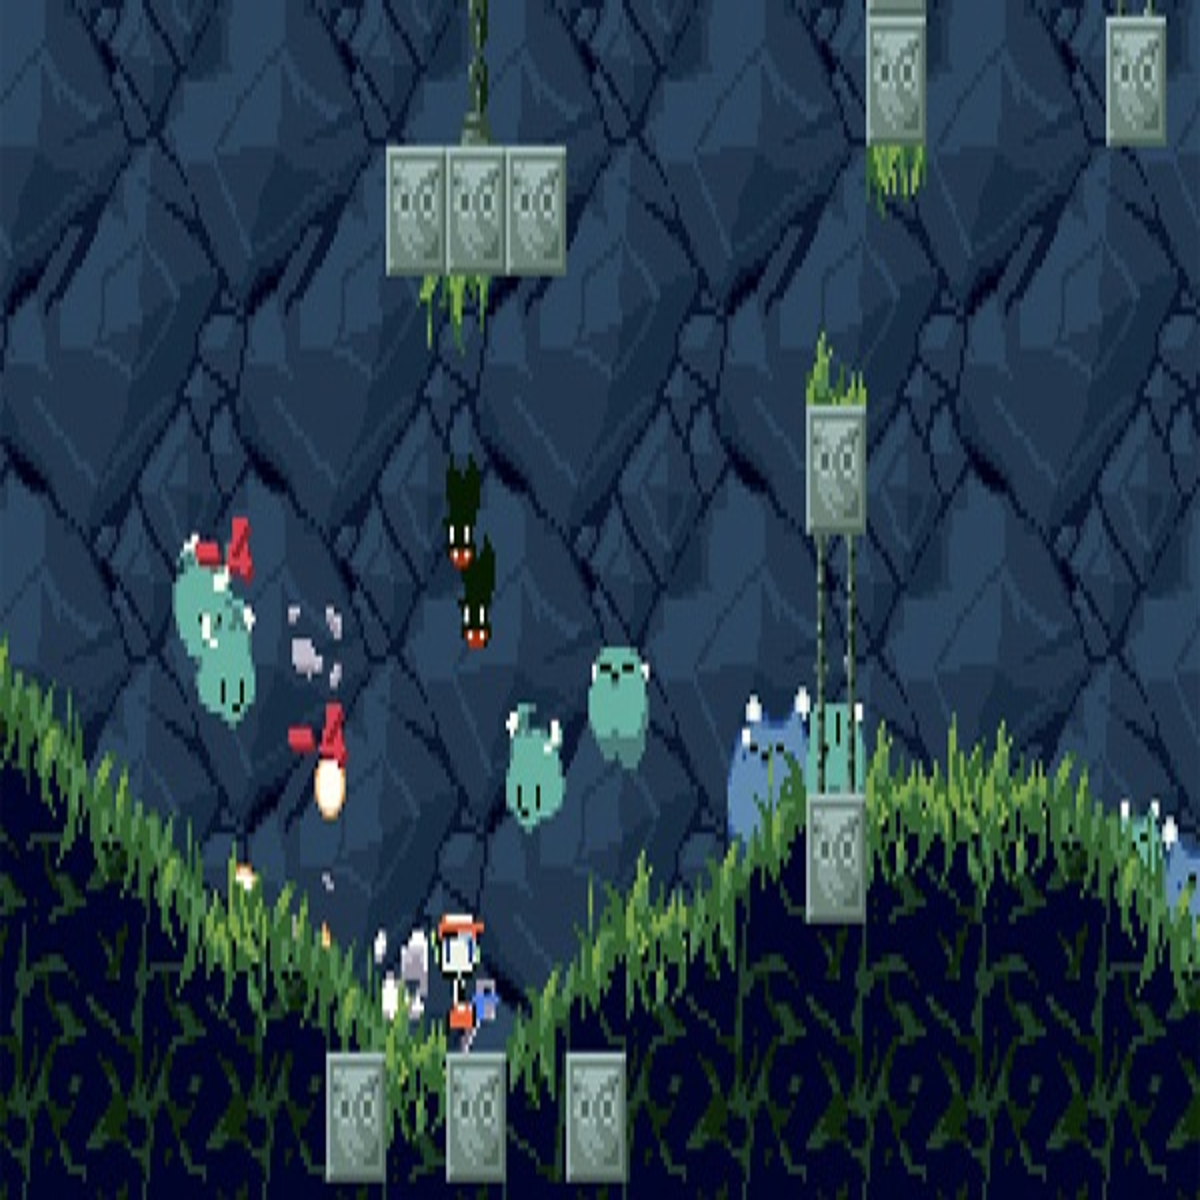 The free Epic Games Store game this week is the acclaimed indie title Cave  Story+ - Neowin